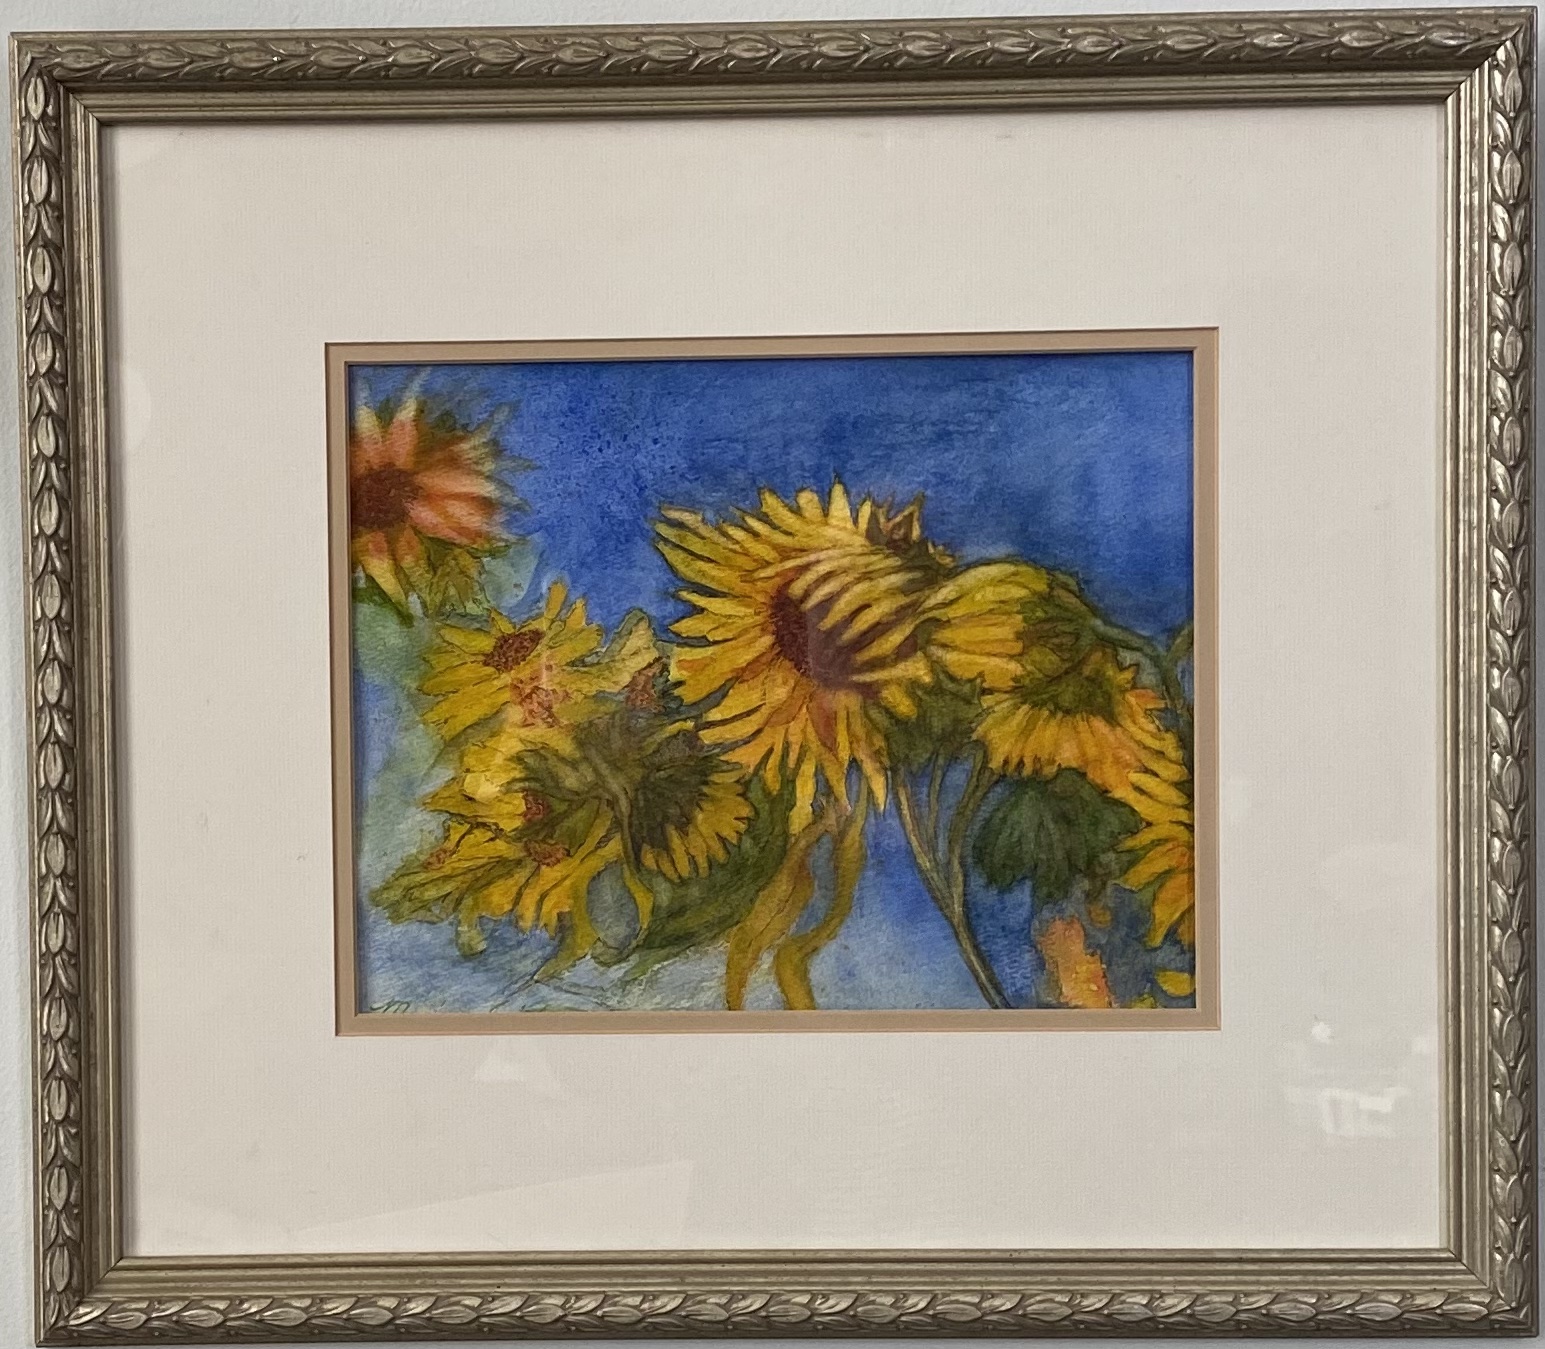 Sunflower Crazy
Watercolor on paper
11" X 8.5"
$175.